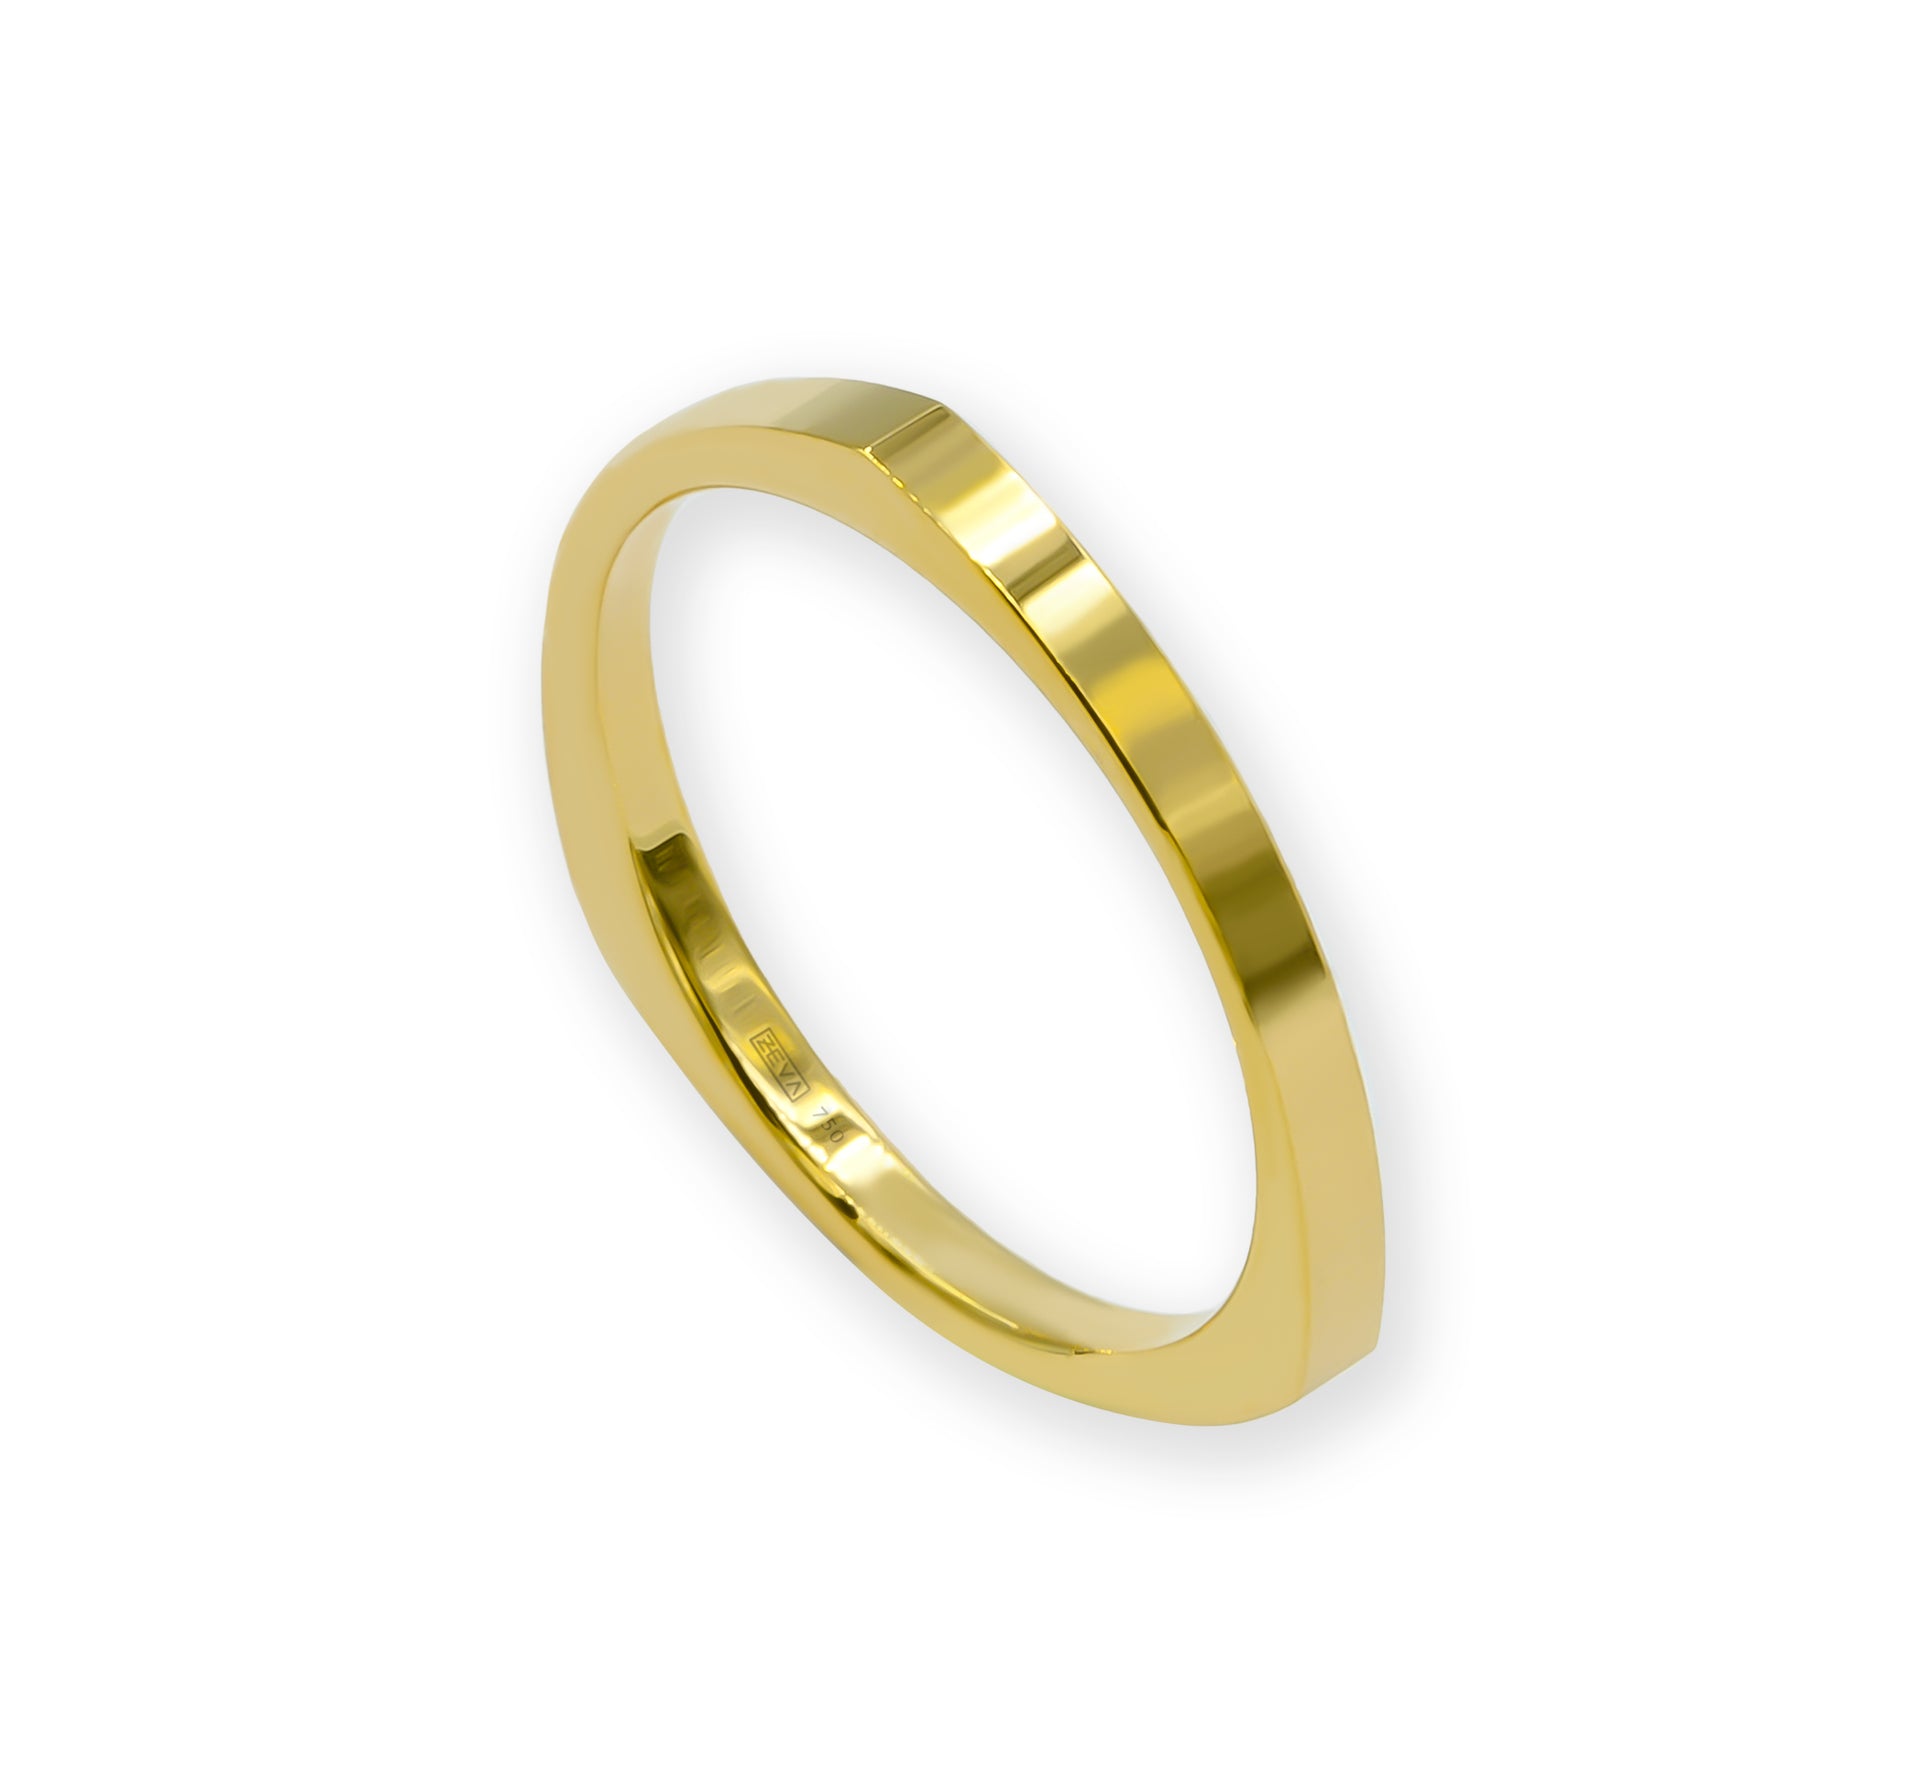 Ring DANCE 2mm triangle shape yellow gold 18k